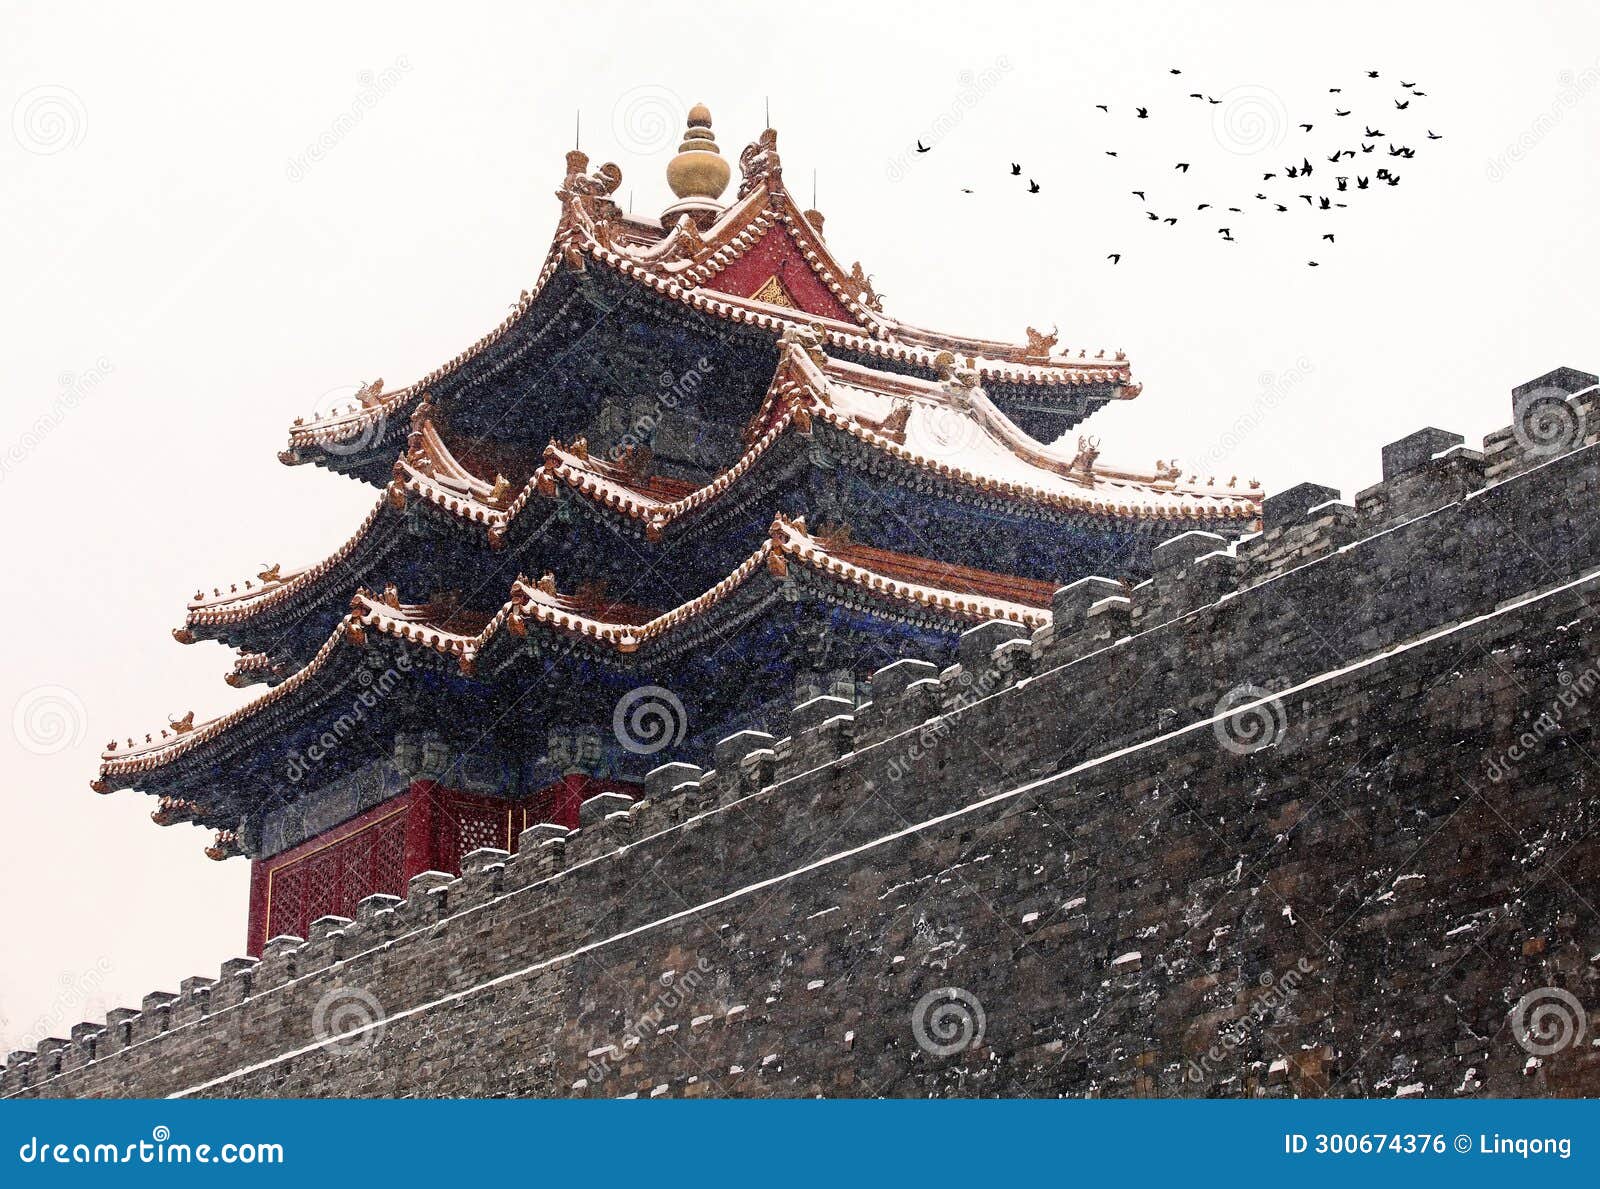 the spectacular turrets of the forbidden city in the snow.